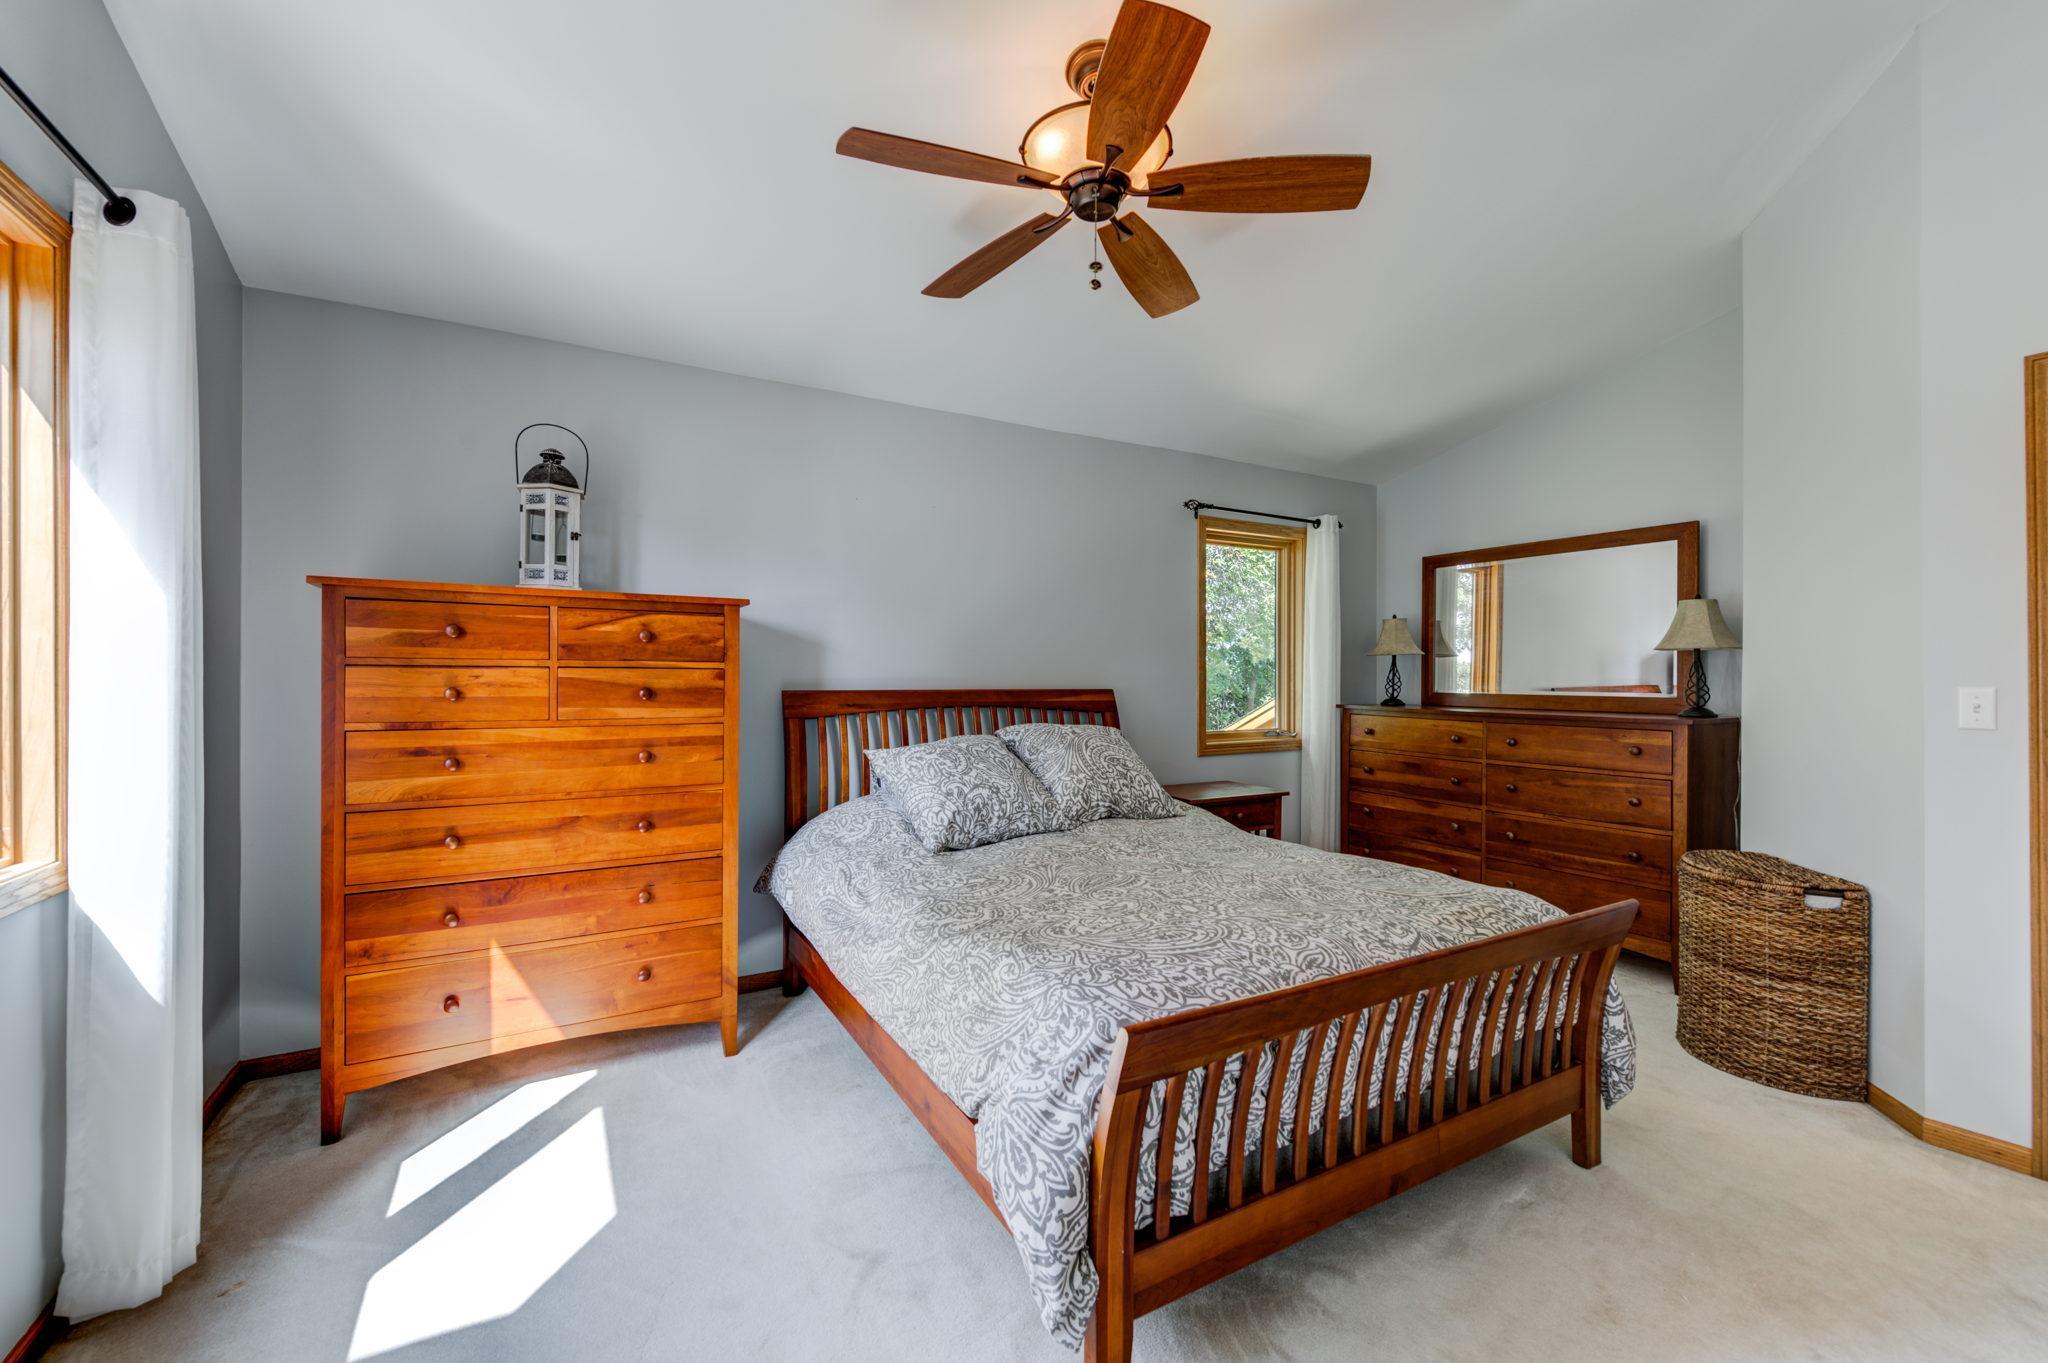 On top of the abundant space for dressers in this master bedroom there is also a nice sized 5x7 walk-in closet.